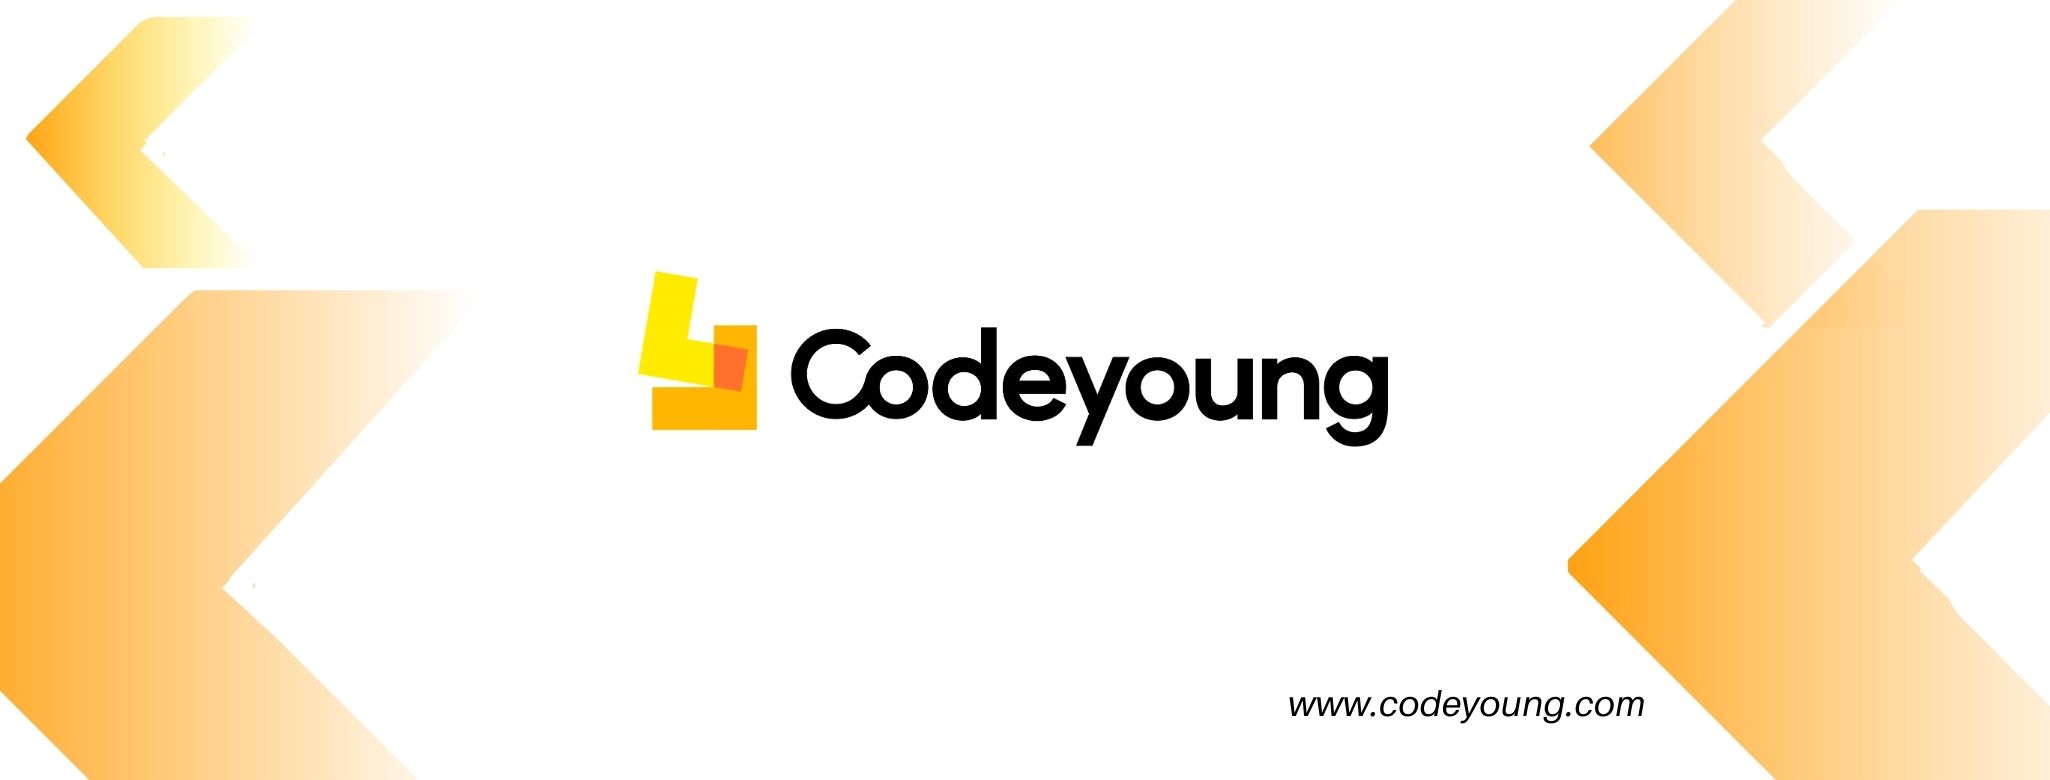 All Codeyoung Deals & Promotions